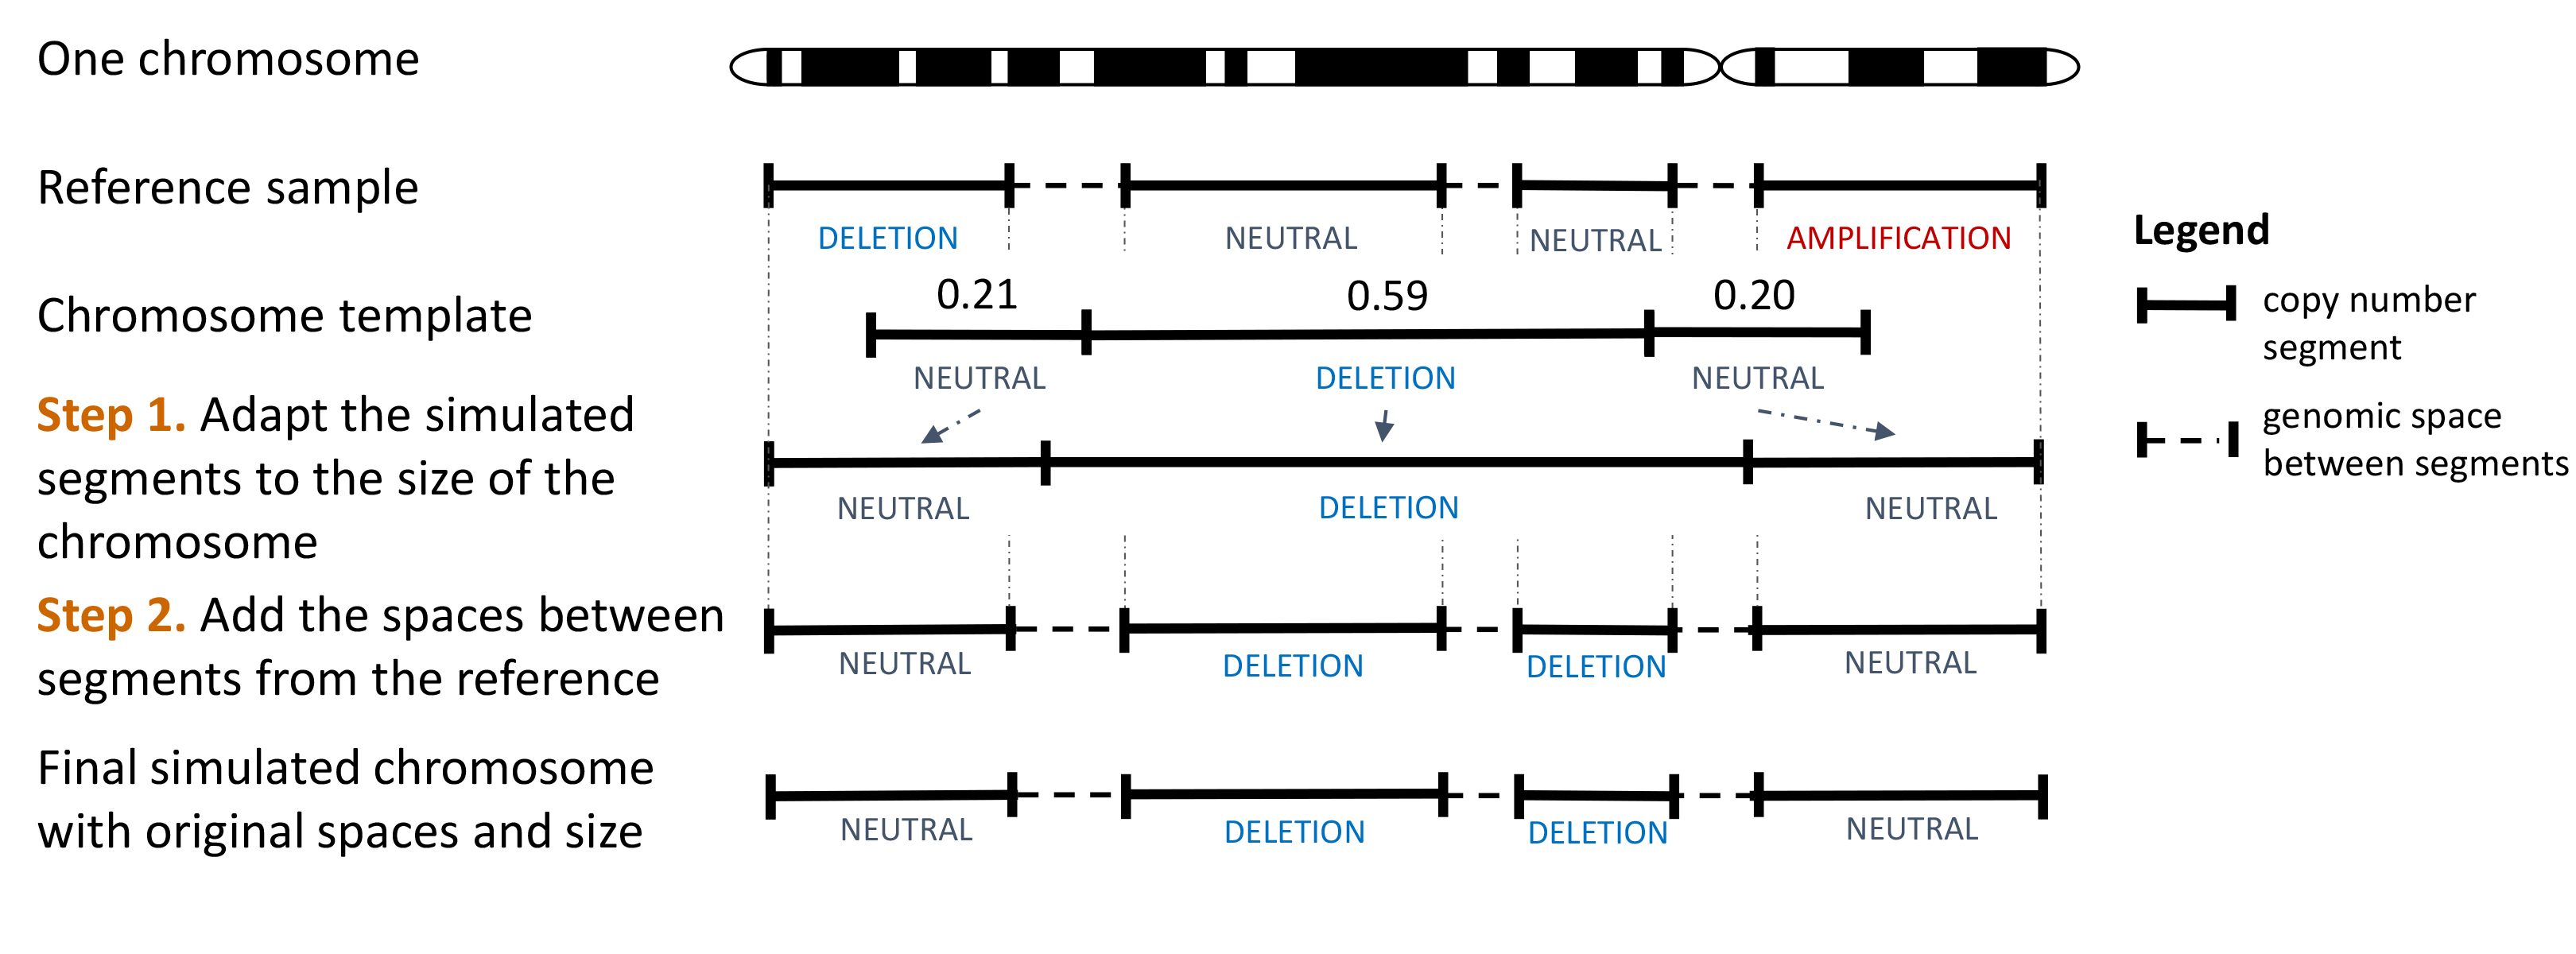 Workflow showing the creation of a simulated chromosome through the use of a template.